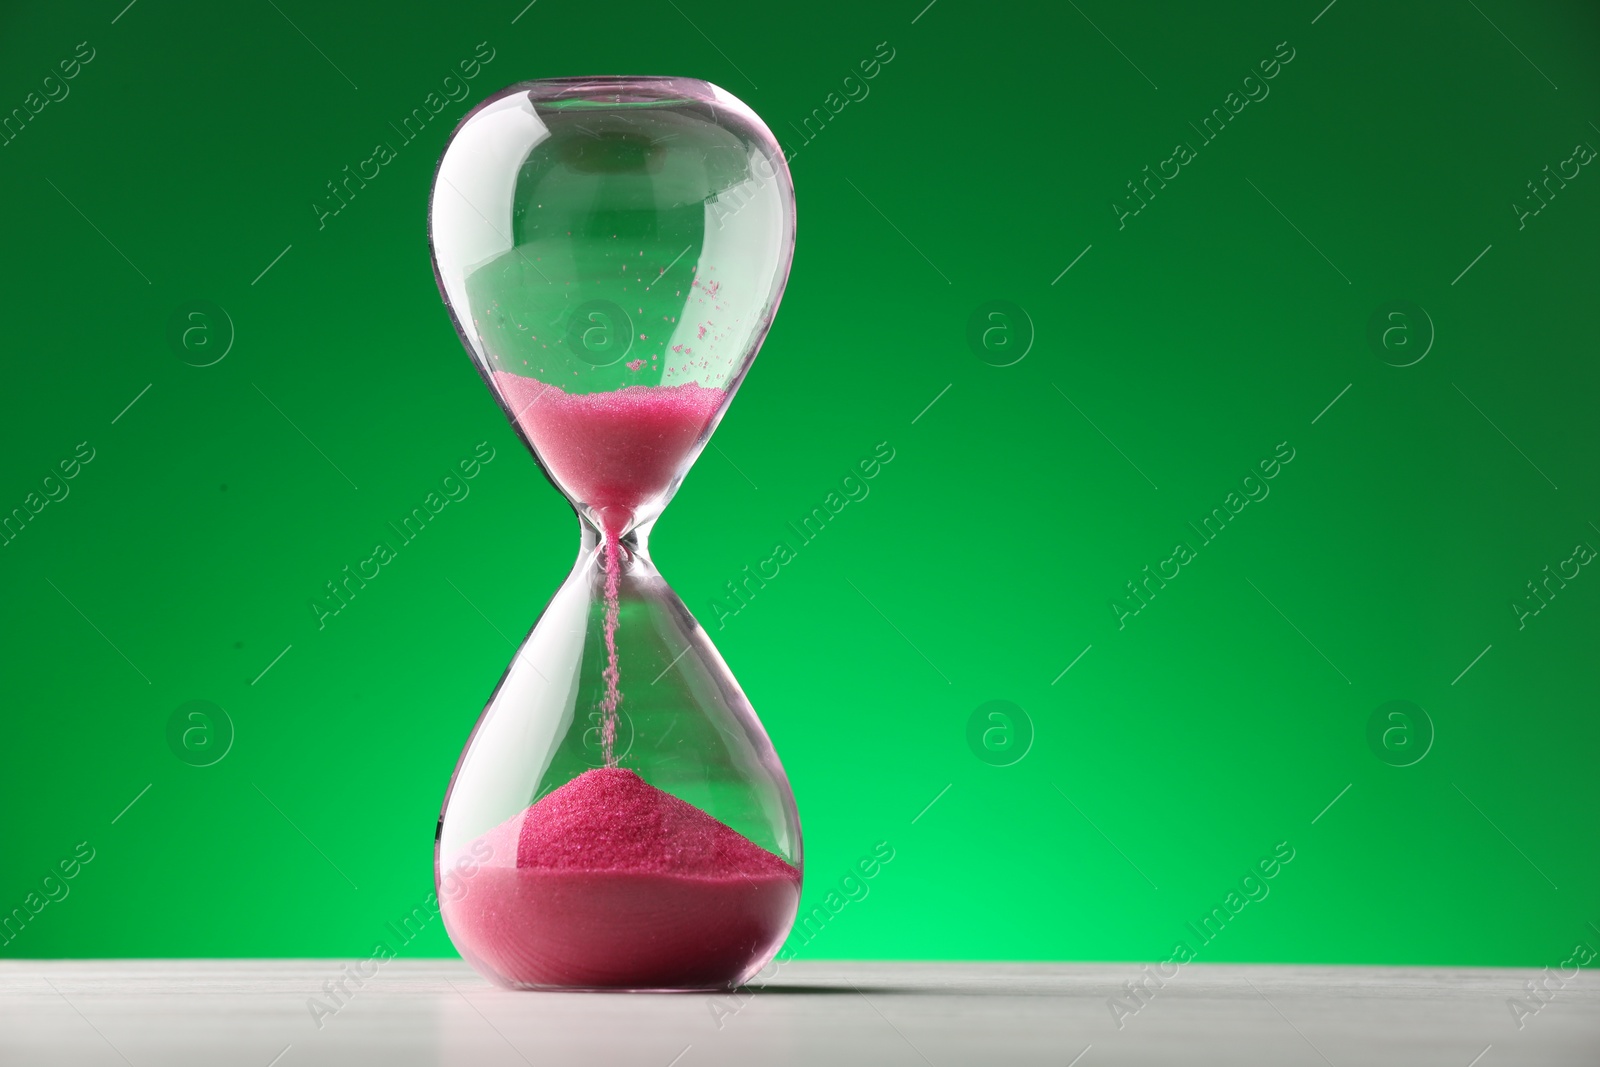 Photo of Hourglass with pink flowing sand on table against green background. Space for text